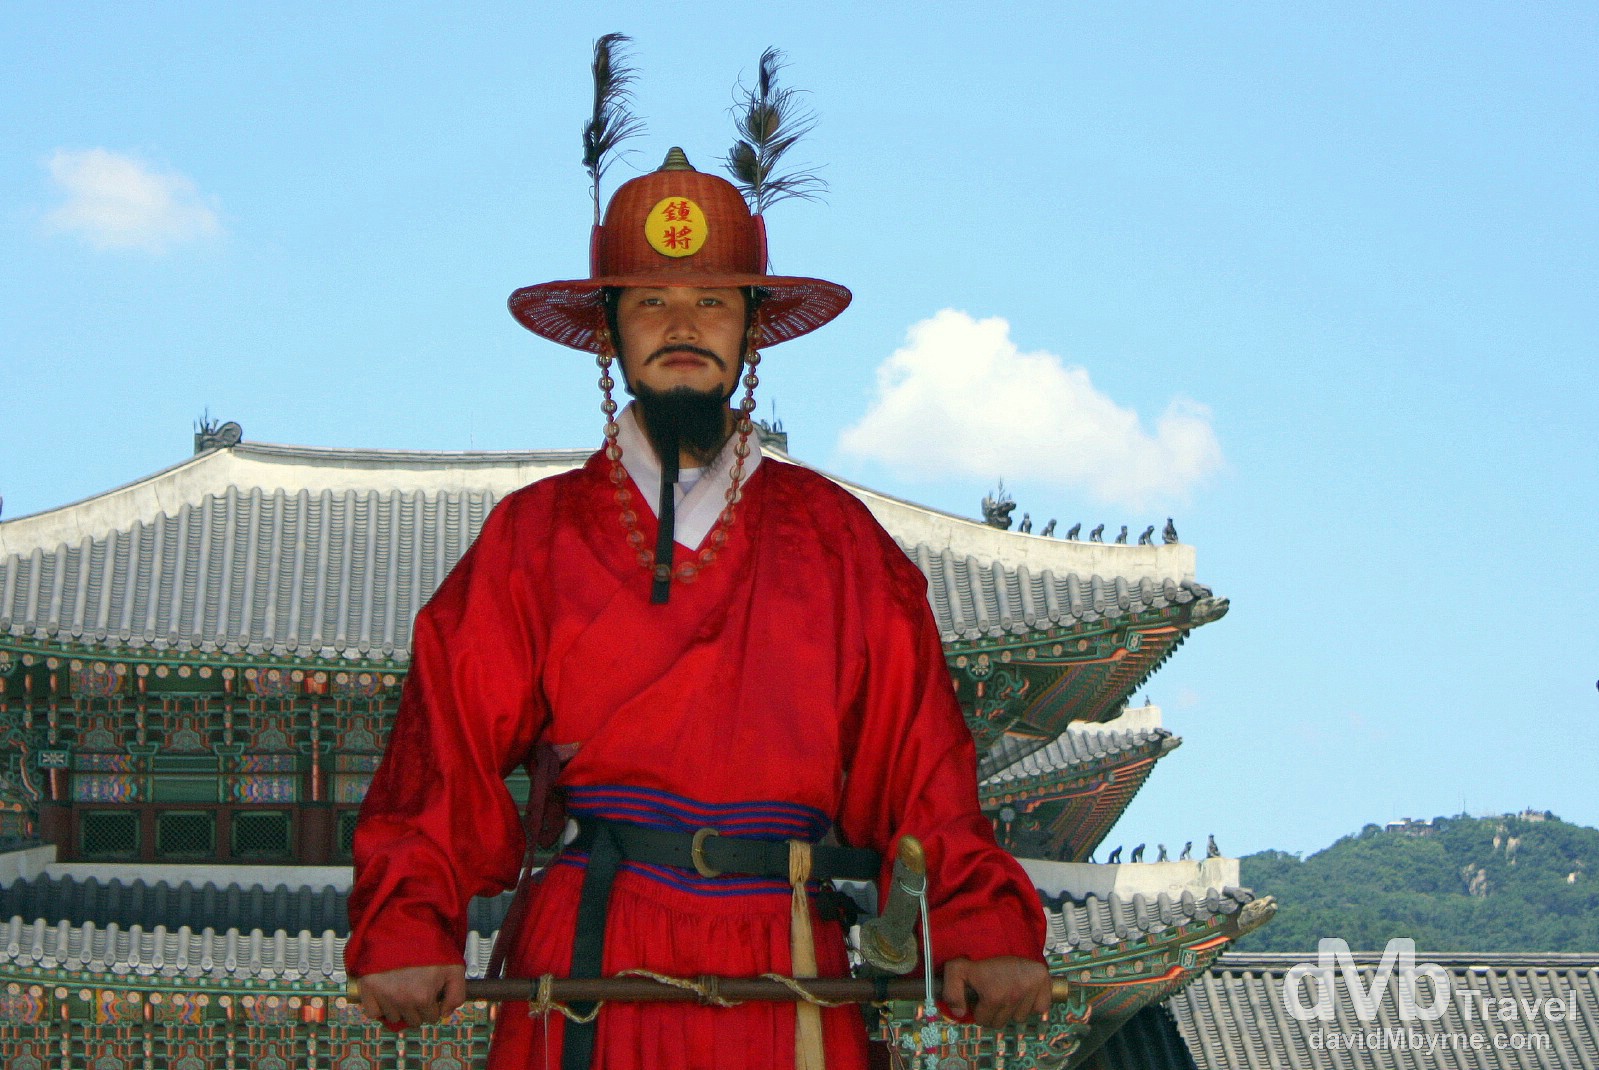 A ceremonial guard standing under the South Gate (Gwanghwamun) of Gyeongbok Palace, the largest & most important of the restored royal palaces in Seoul, South Korea. July 8, 2008.